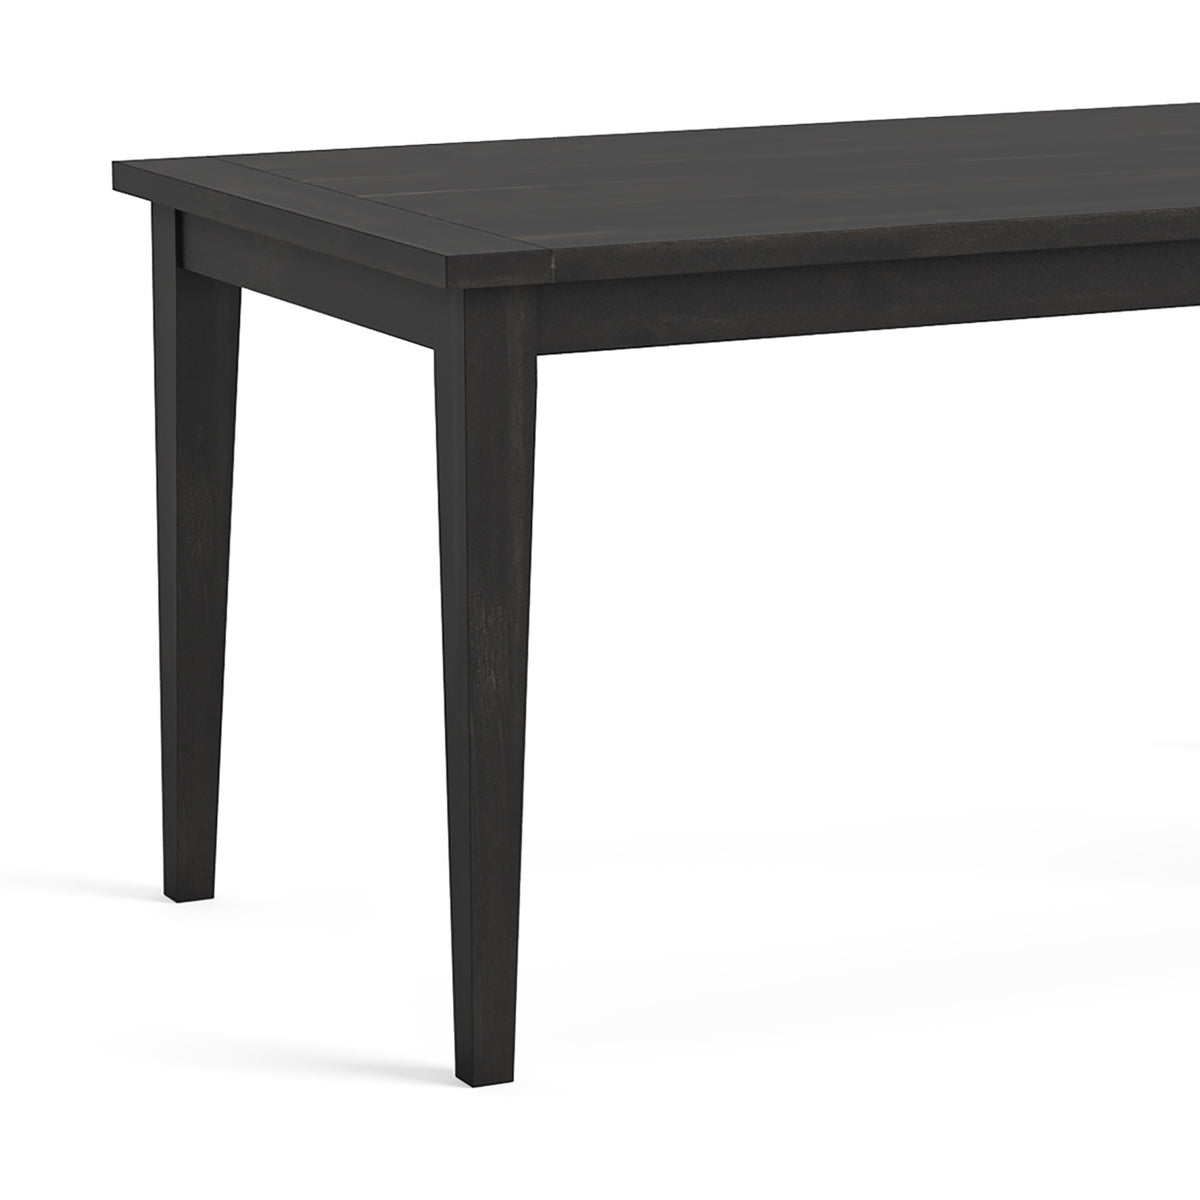 Elise Noir Black 120cm Fixed Dining Table close up of wooden legs